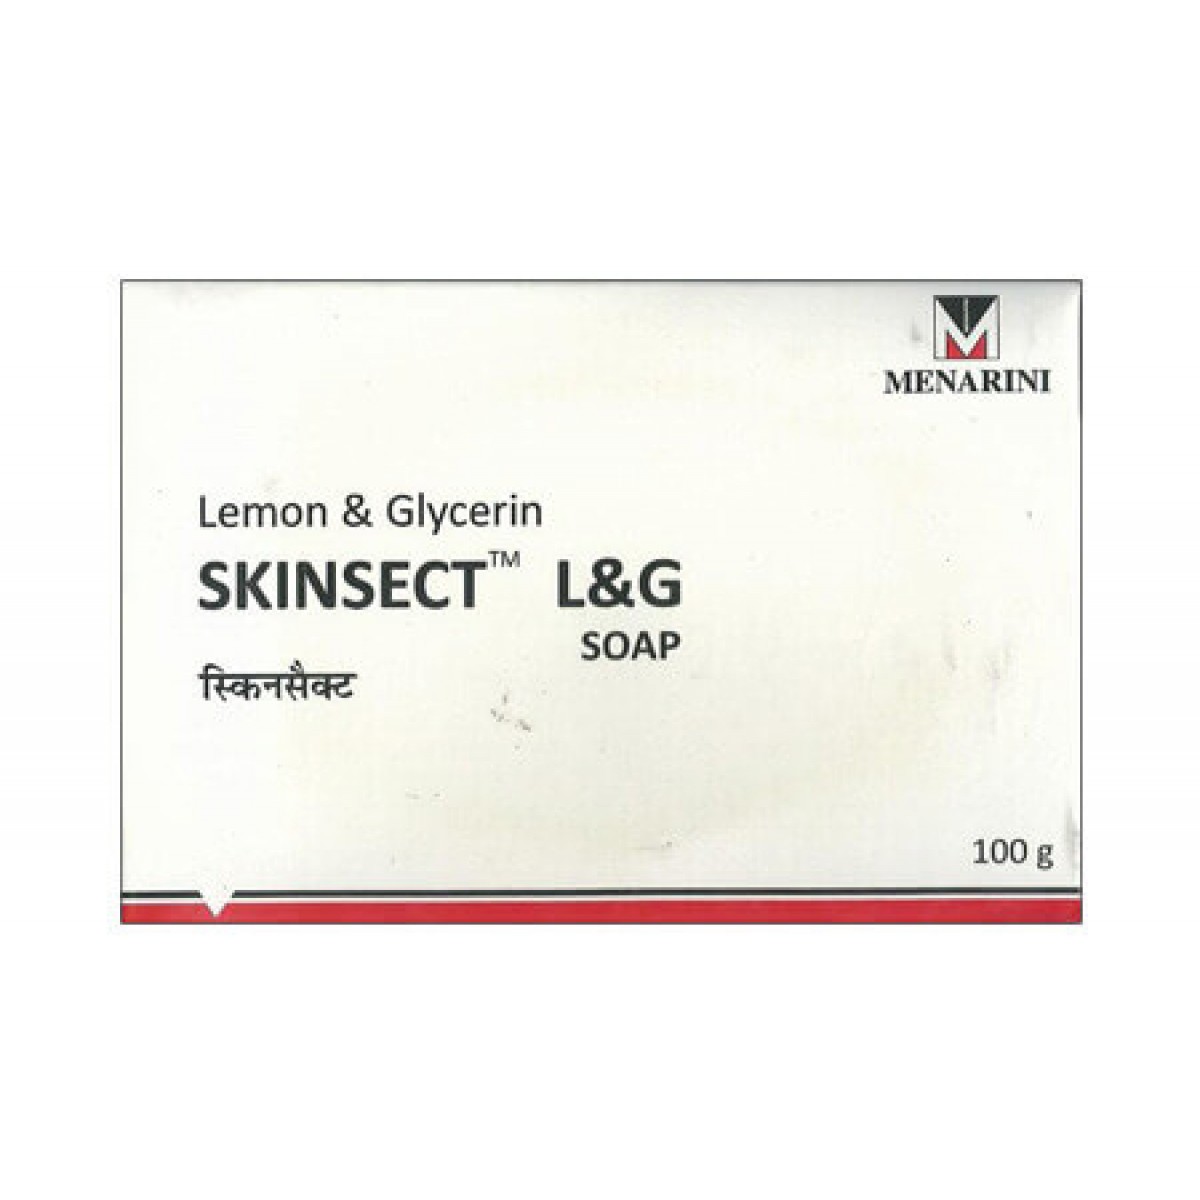 SKINSECT L G bathing bar 100g pack of 4